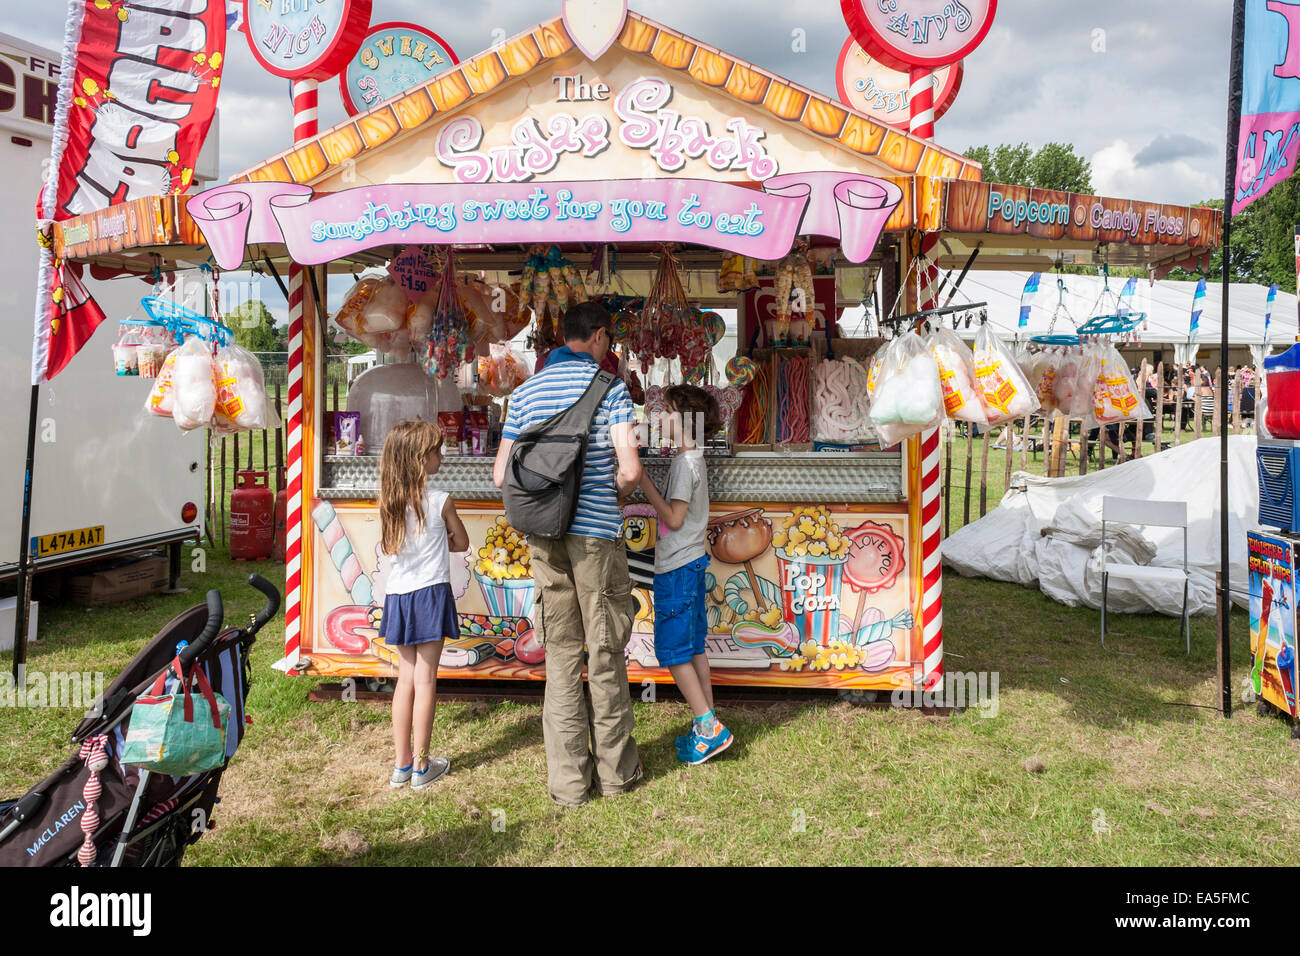 Man buying sweets for children from a stall selling sugary snacks at an English summer fair. Stock Photo